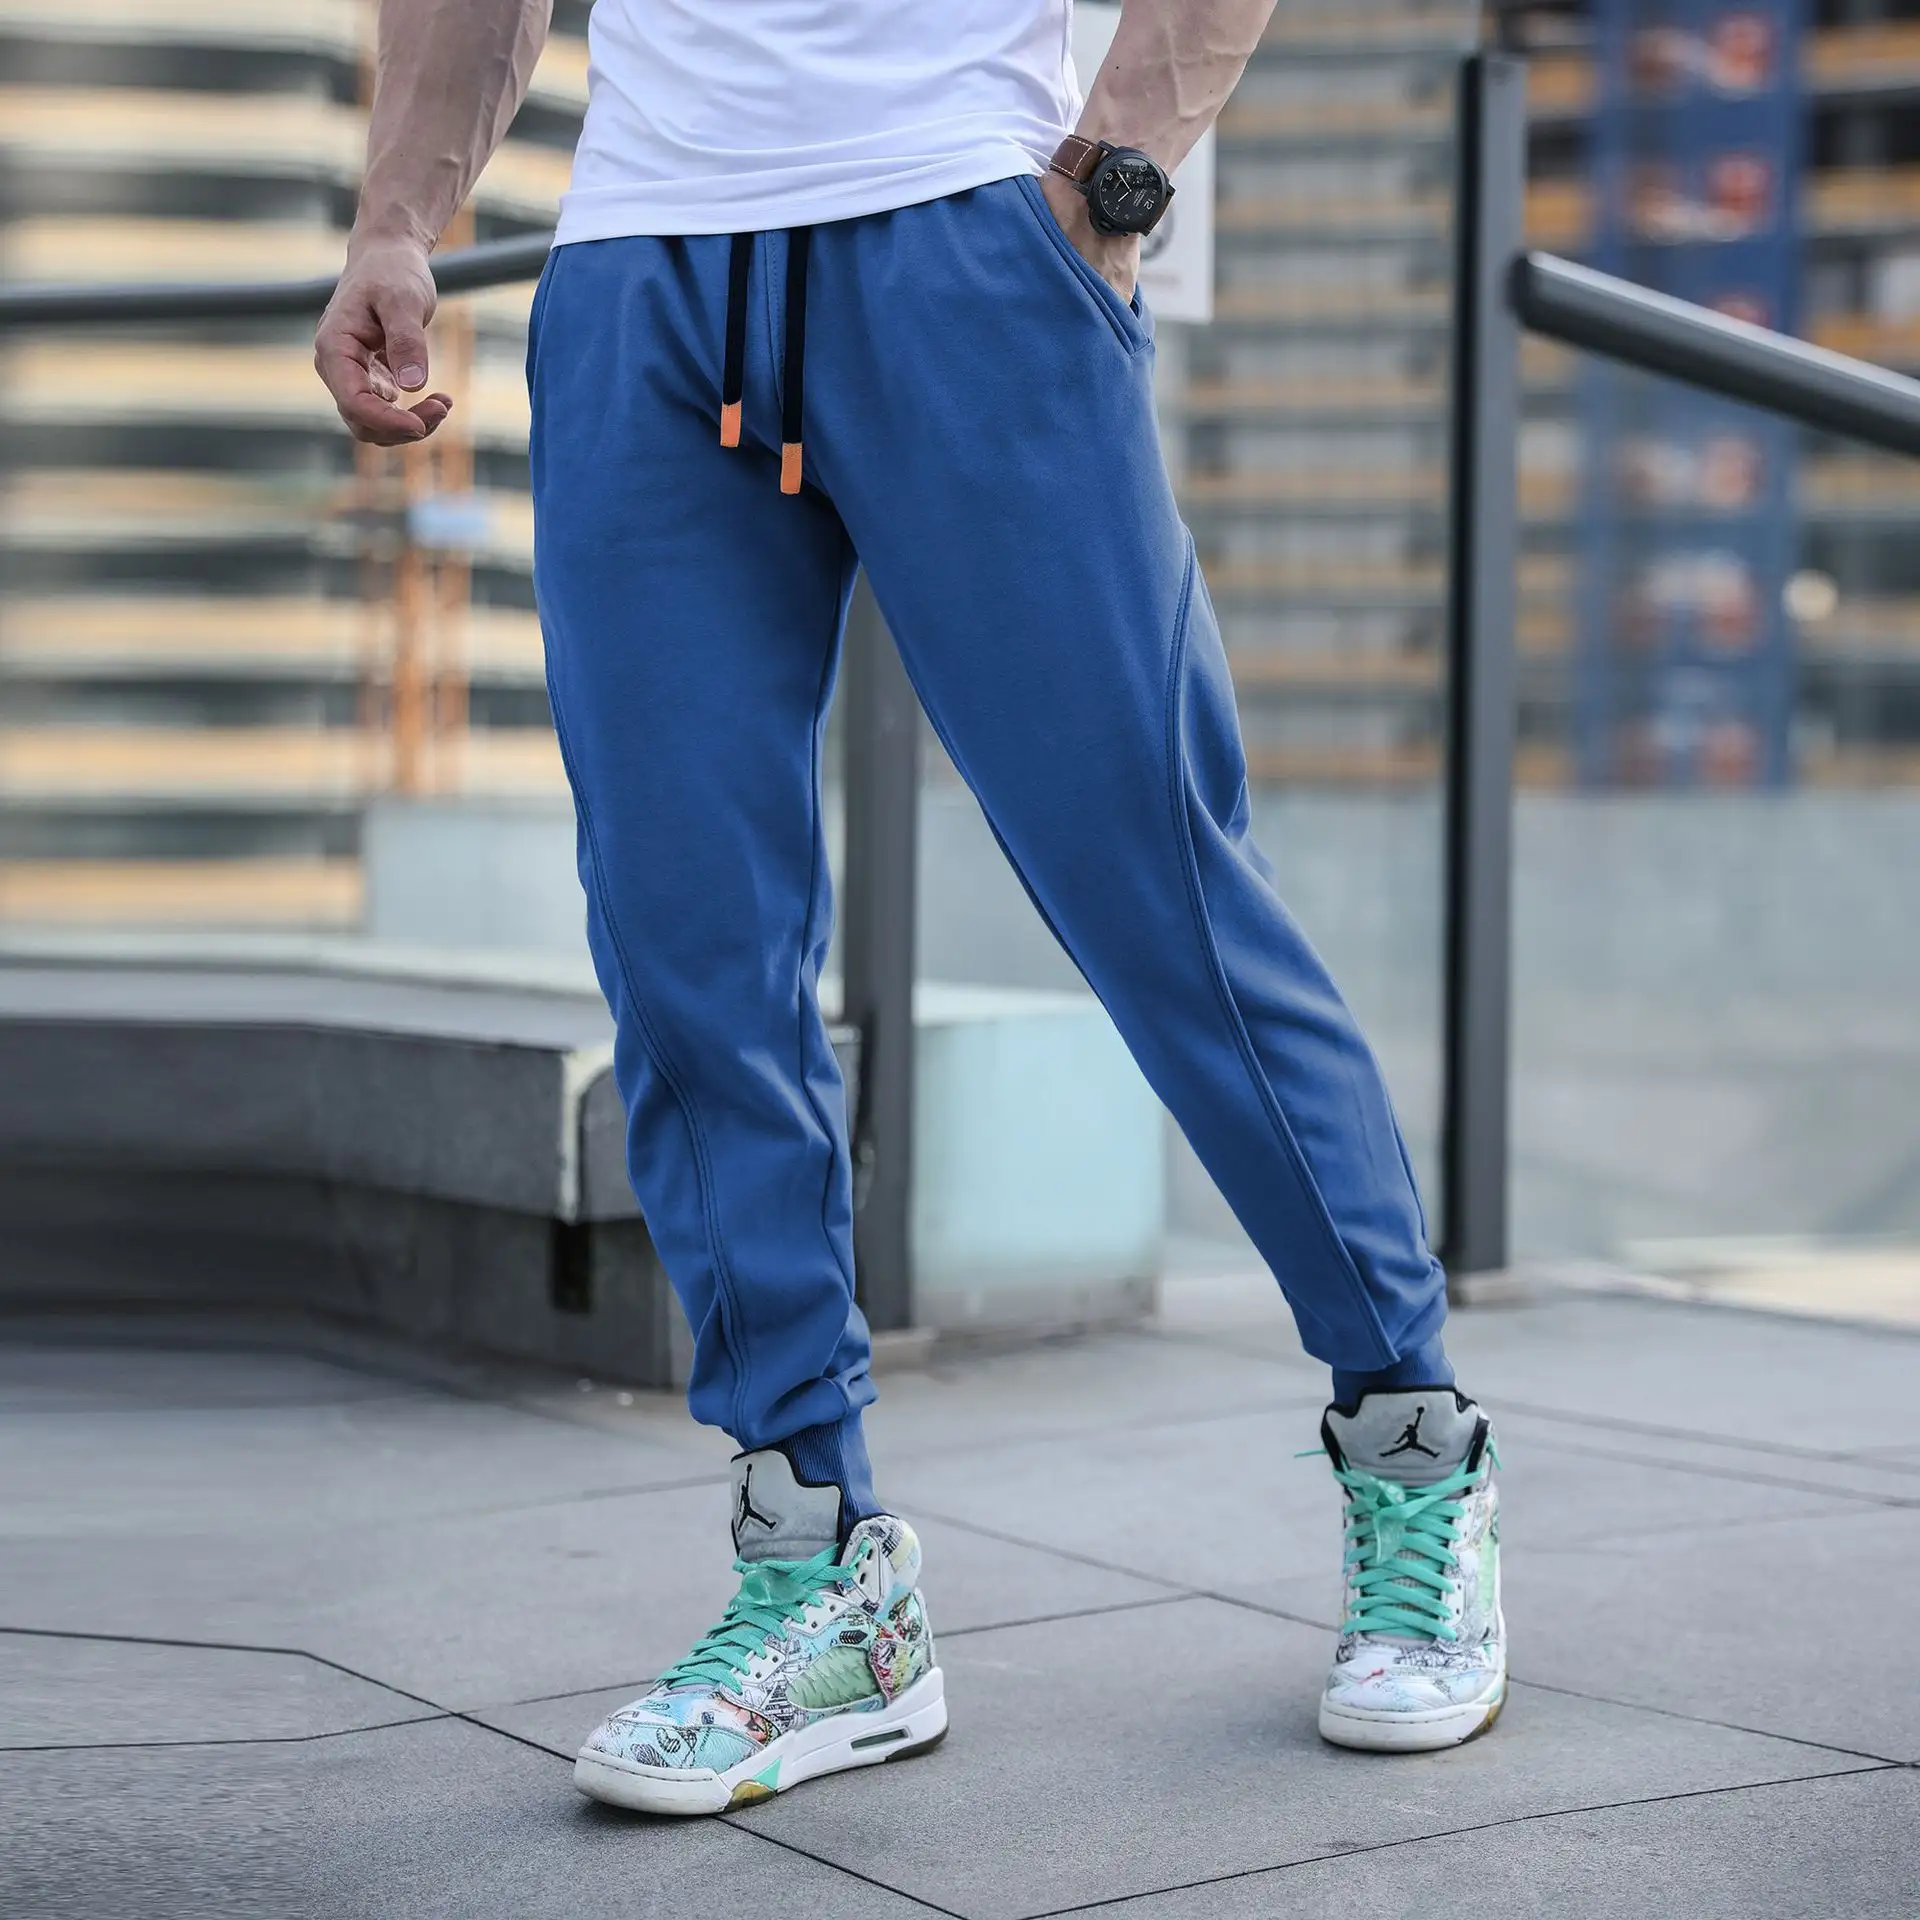 Unisex Jeans Blue Team Custom, Oversized Mens Jeans Casual Pink Pants Trousers Wide Leg Bell Bottoms Straight Flared Pants/